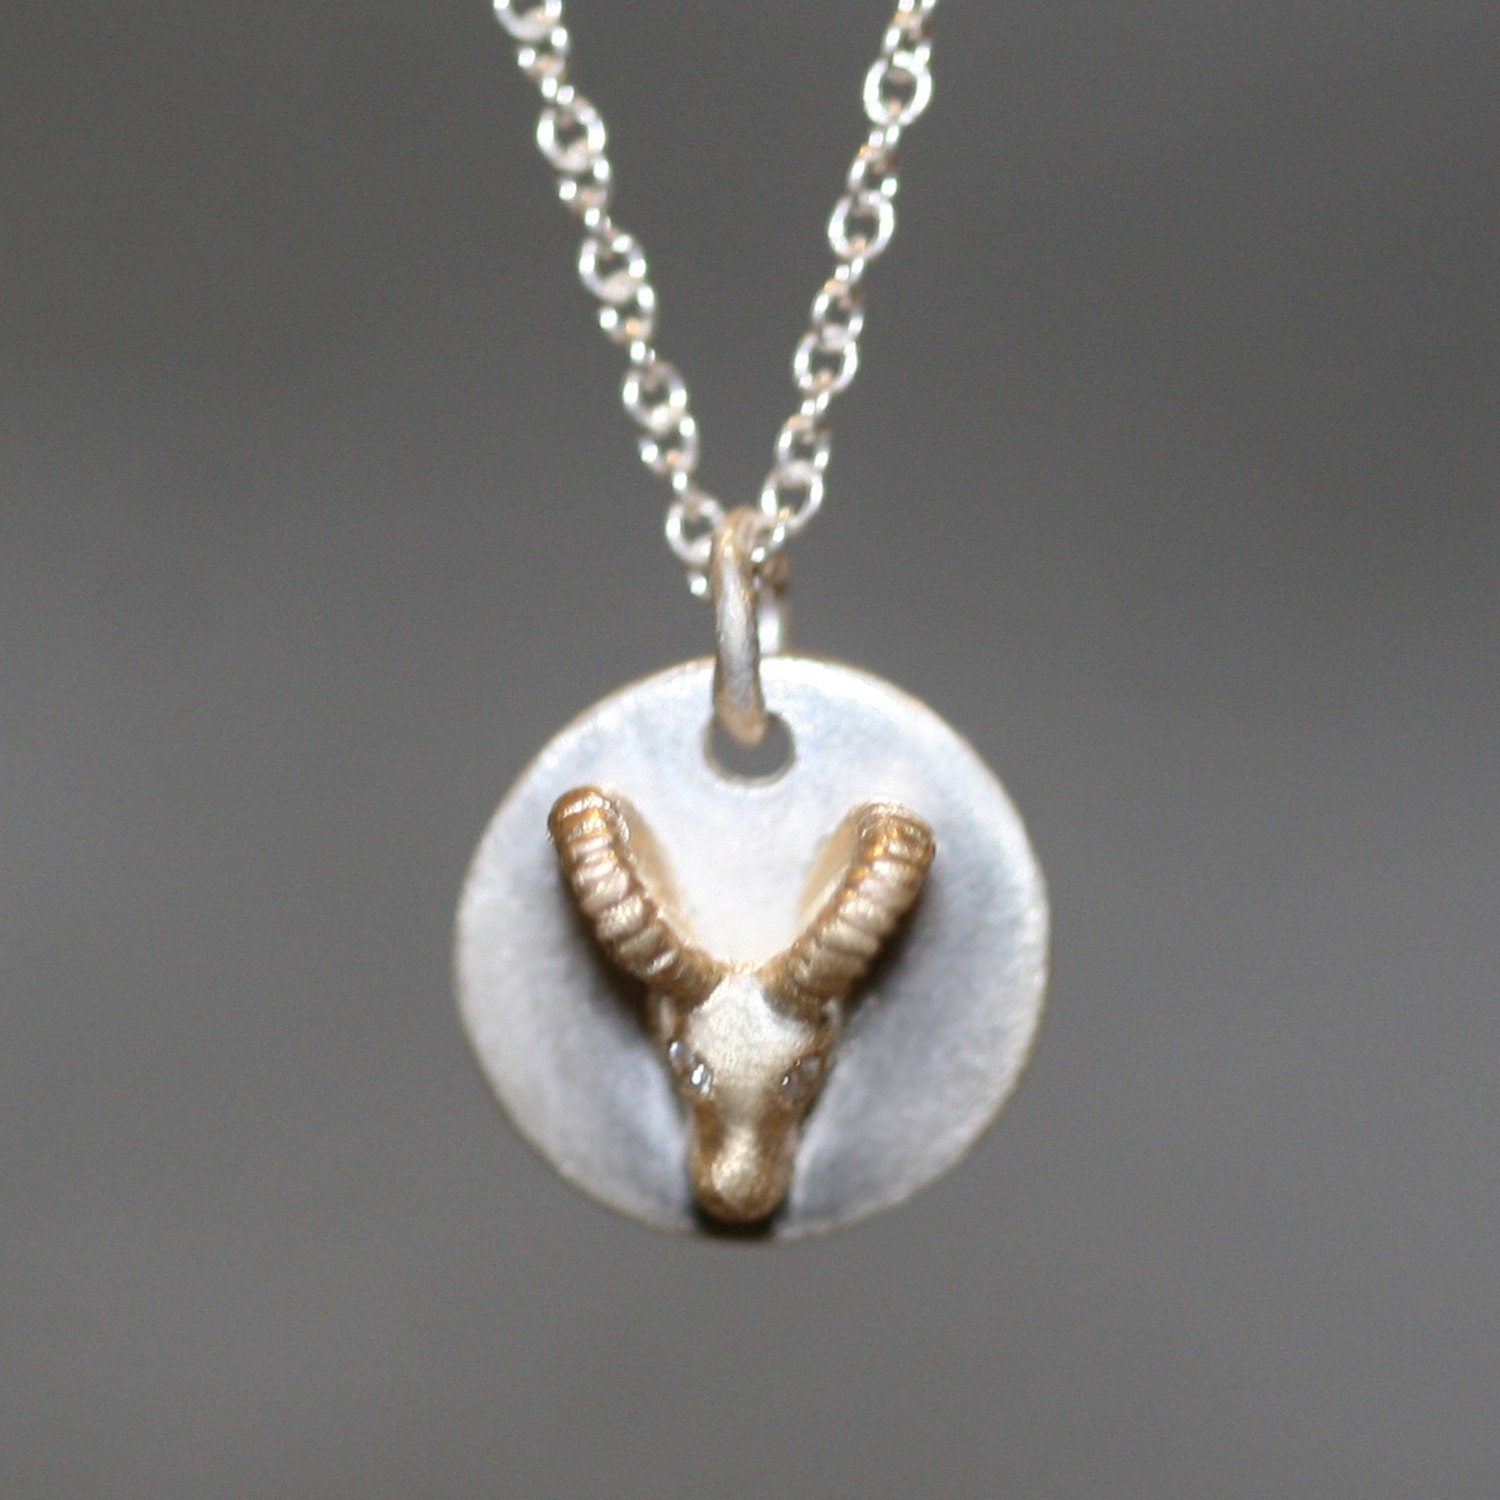 Ram Disk Necklace in 14K Gold & Sterling Silver With Diamonds